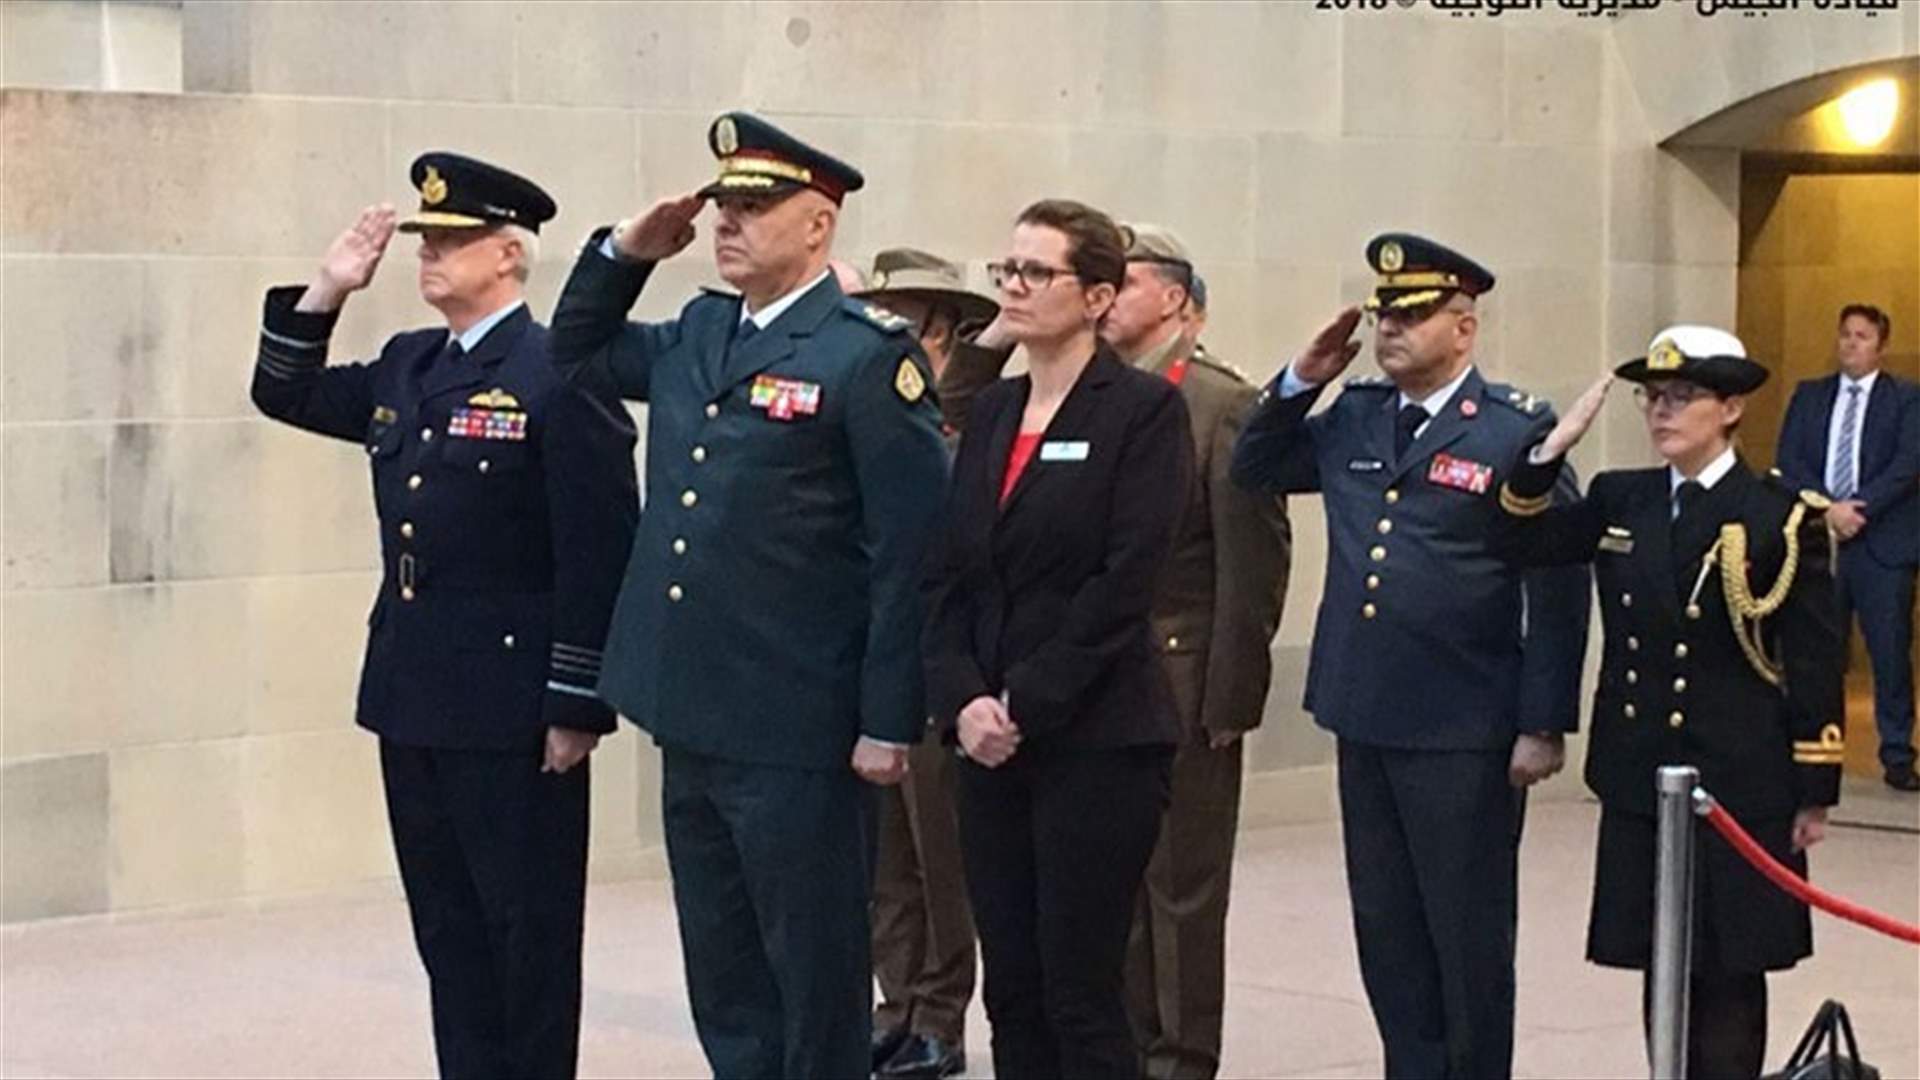 [PHOTOS] Army Commander arrives in Australia on an official visit